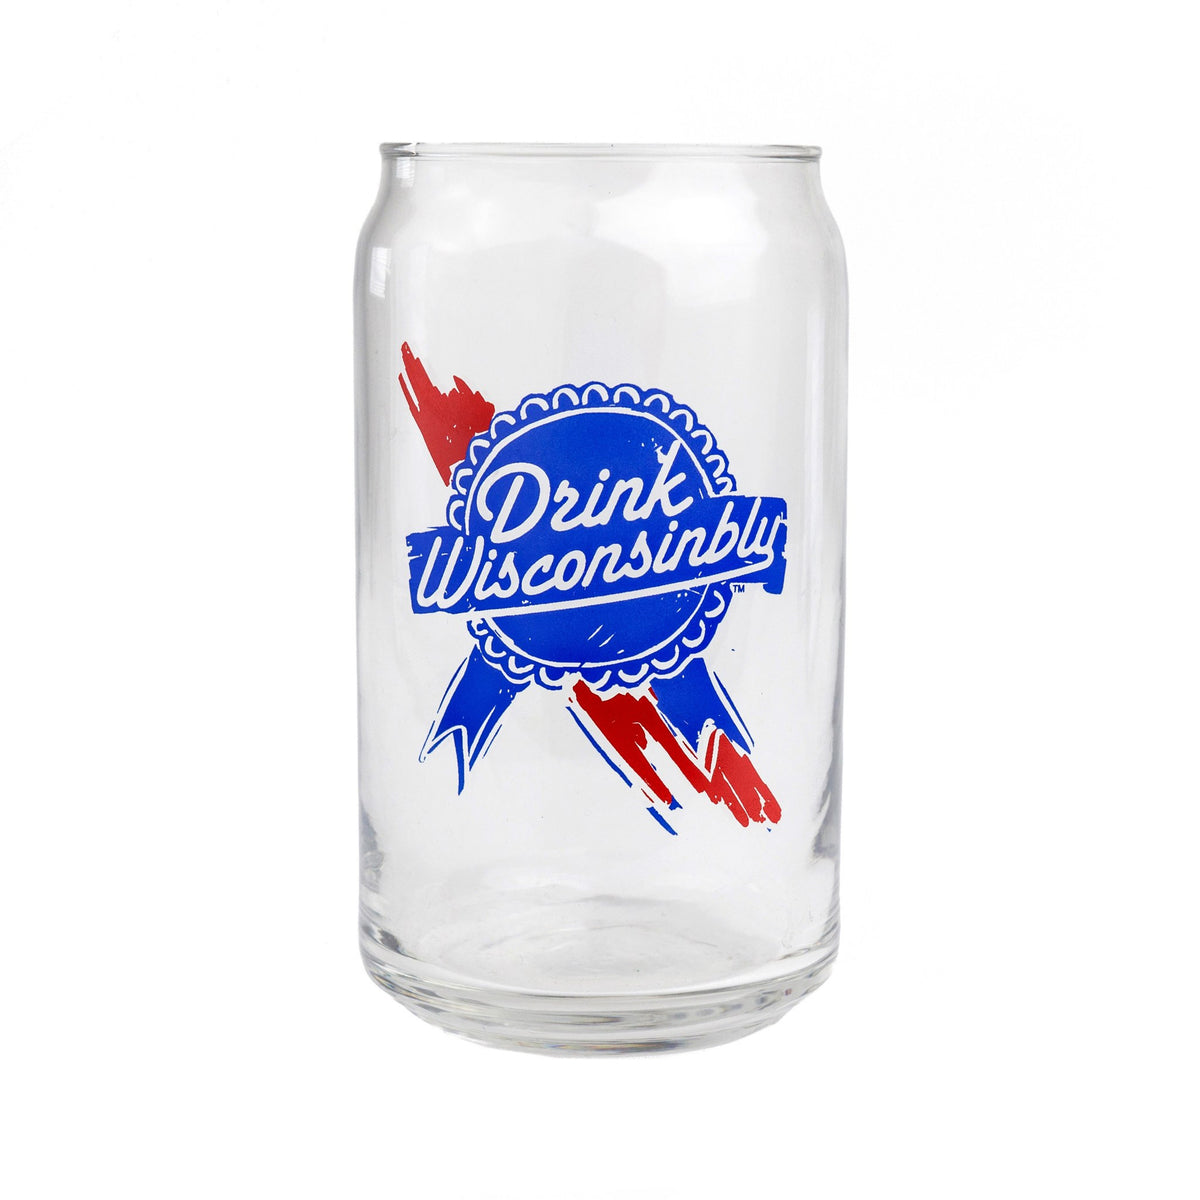 Drink Wisconsinbly "Retro Ribbon" Glass Can